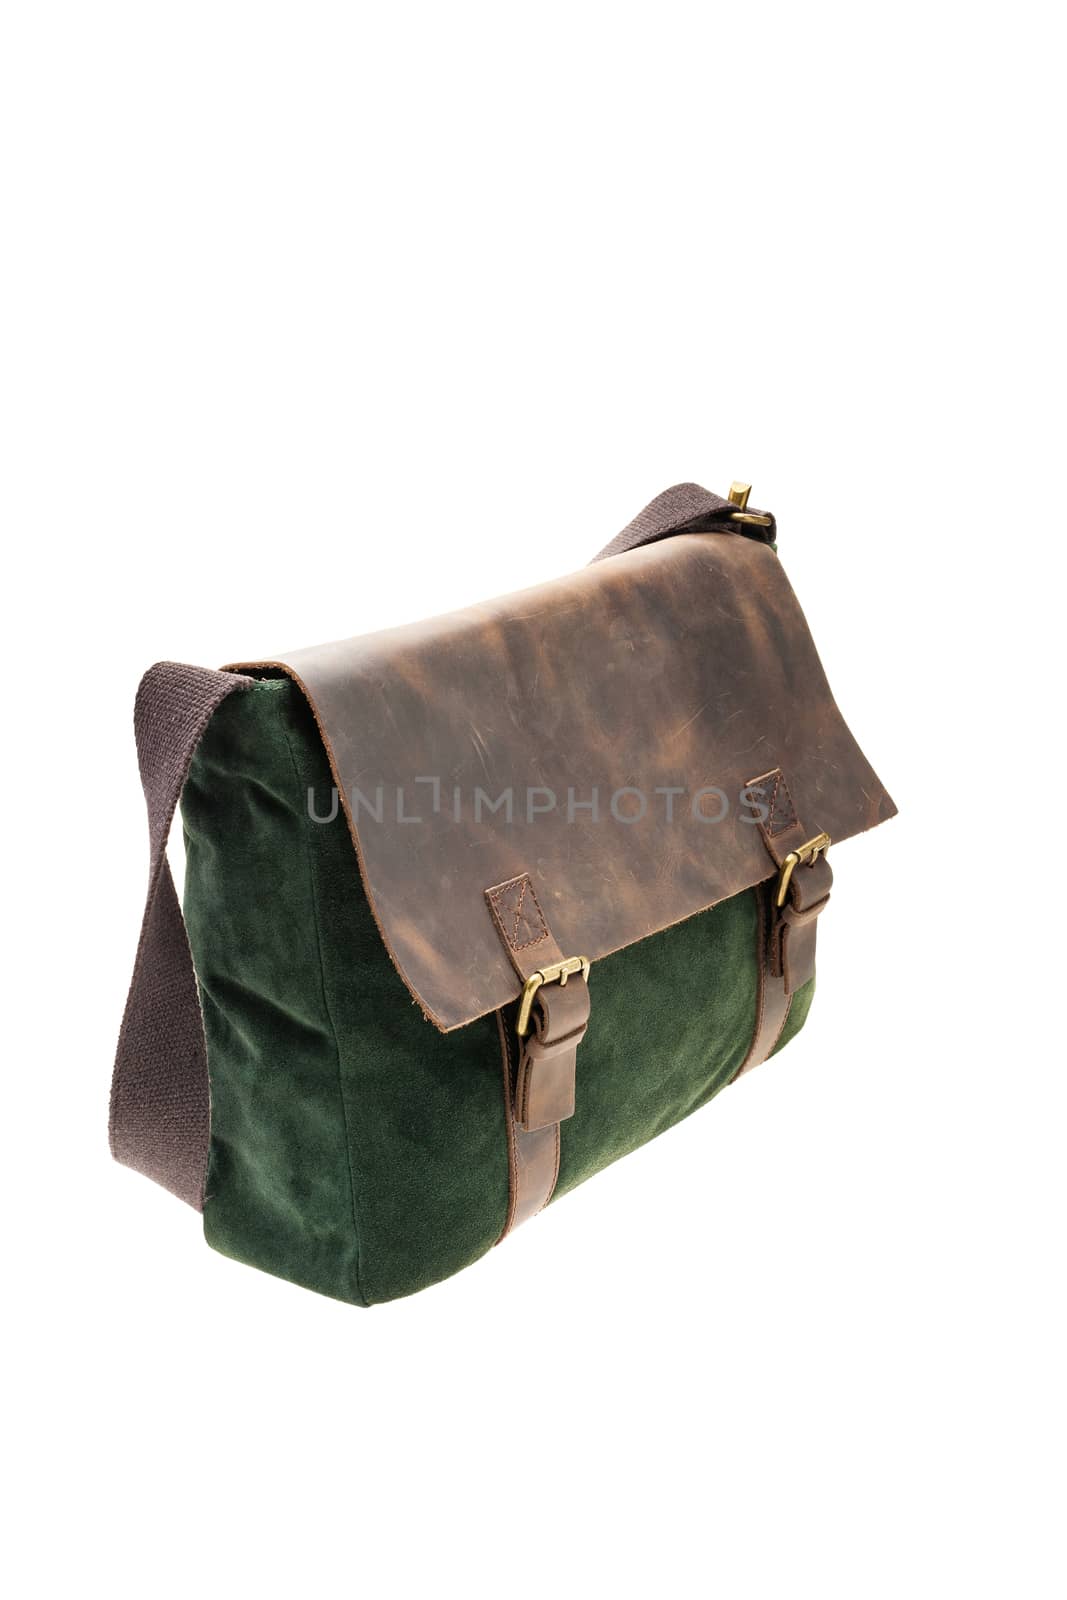 New Green and brown satchel bag isolated on white background.